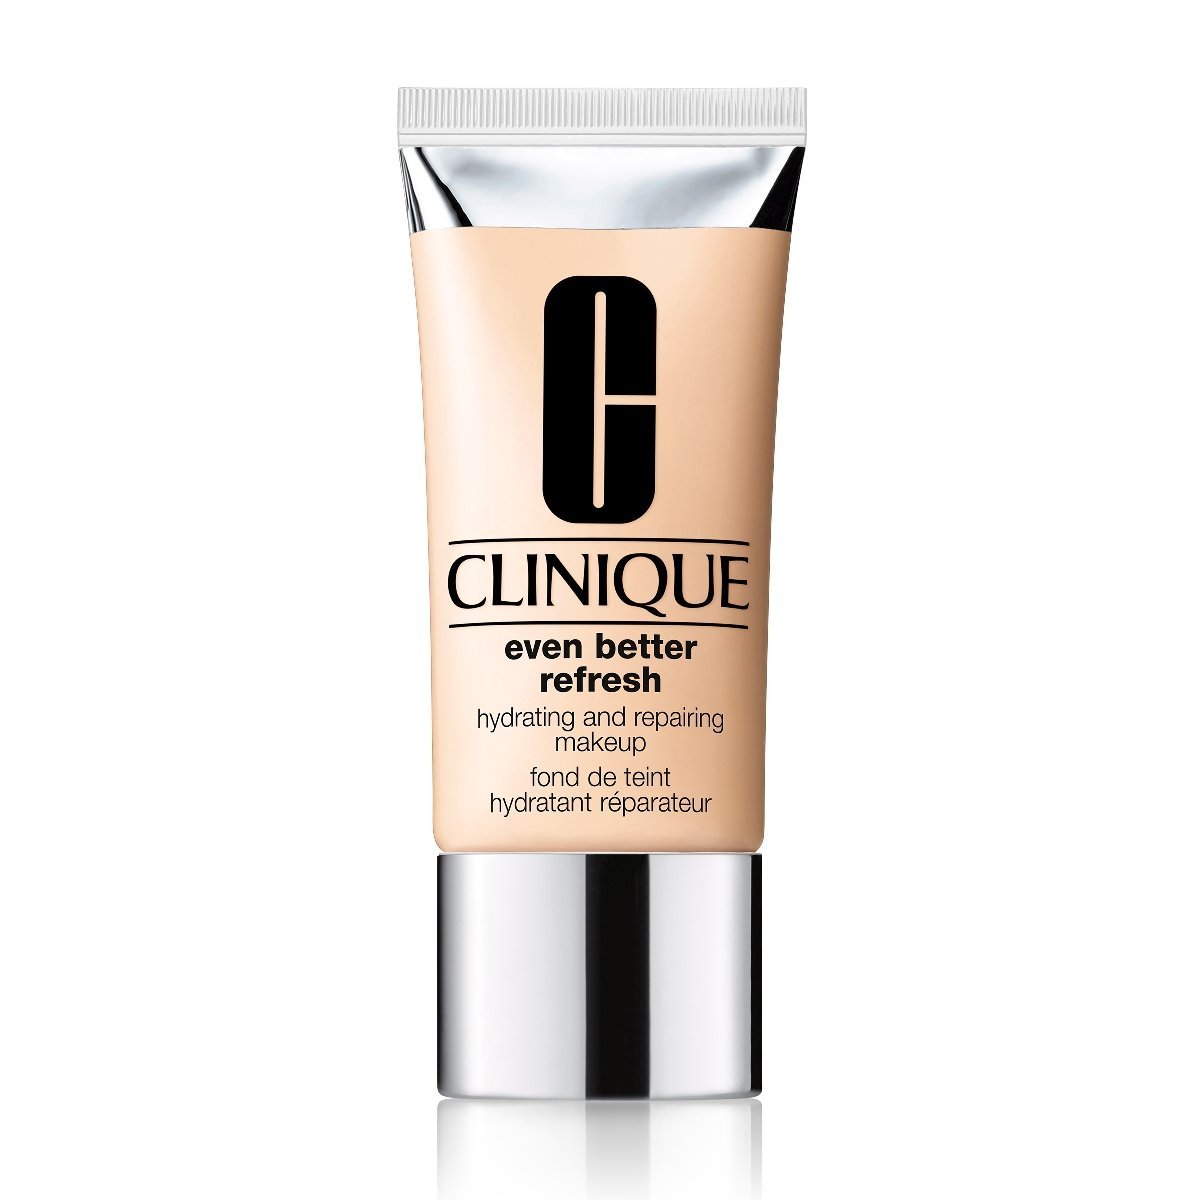 Even Better Refresh Hydrating And Repairing Makeup  Clinique Tono Wn 04 Bone 30 Ml